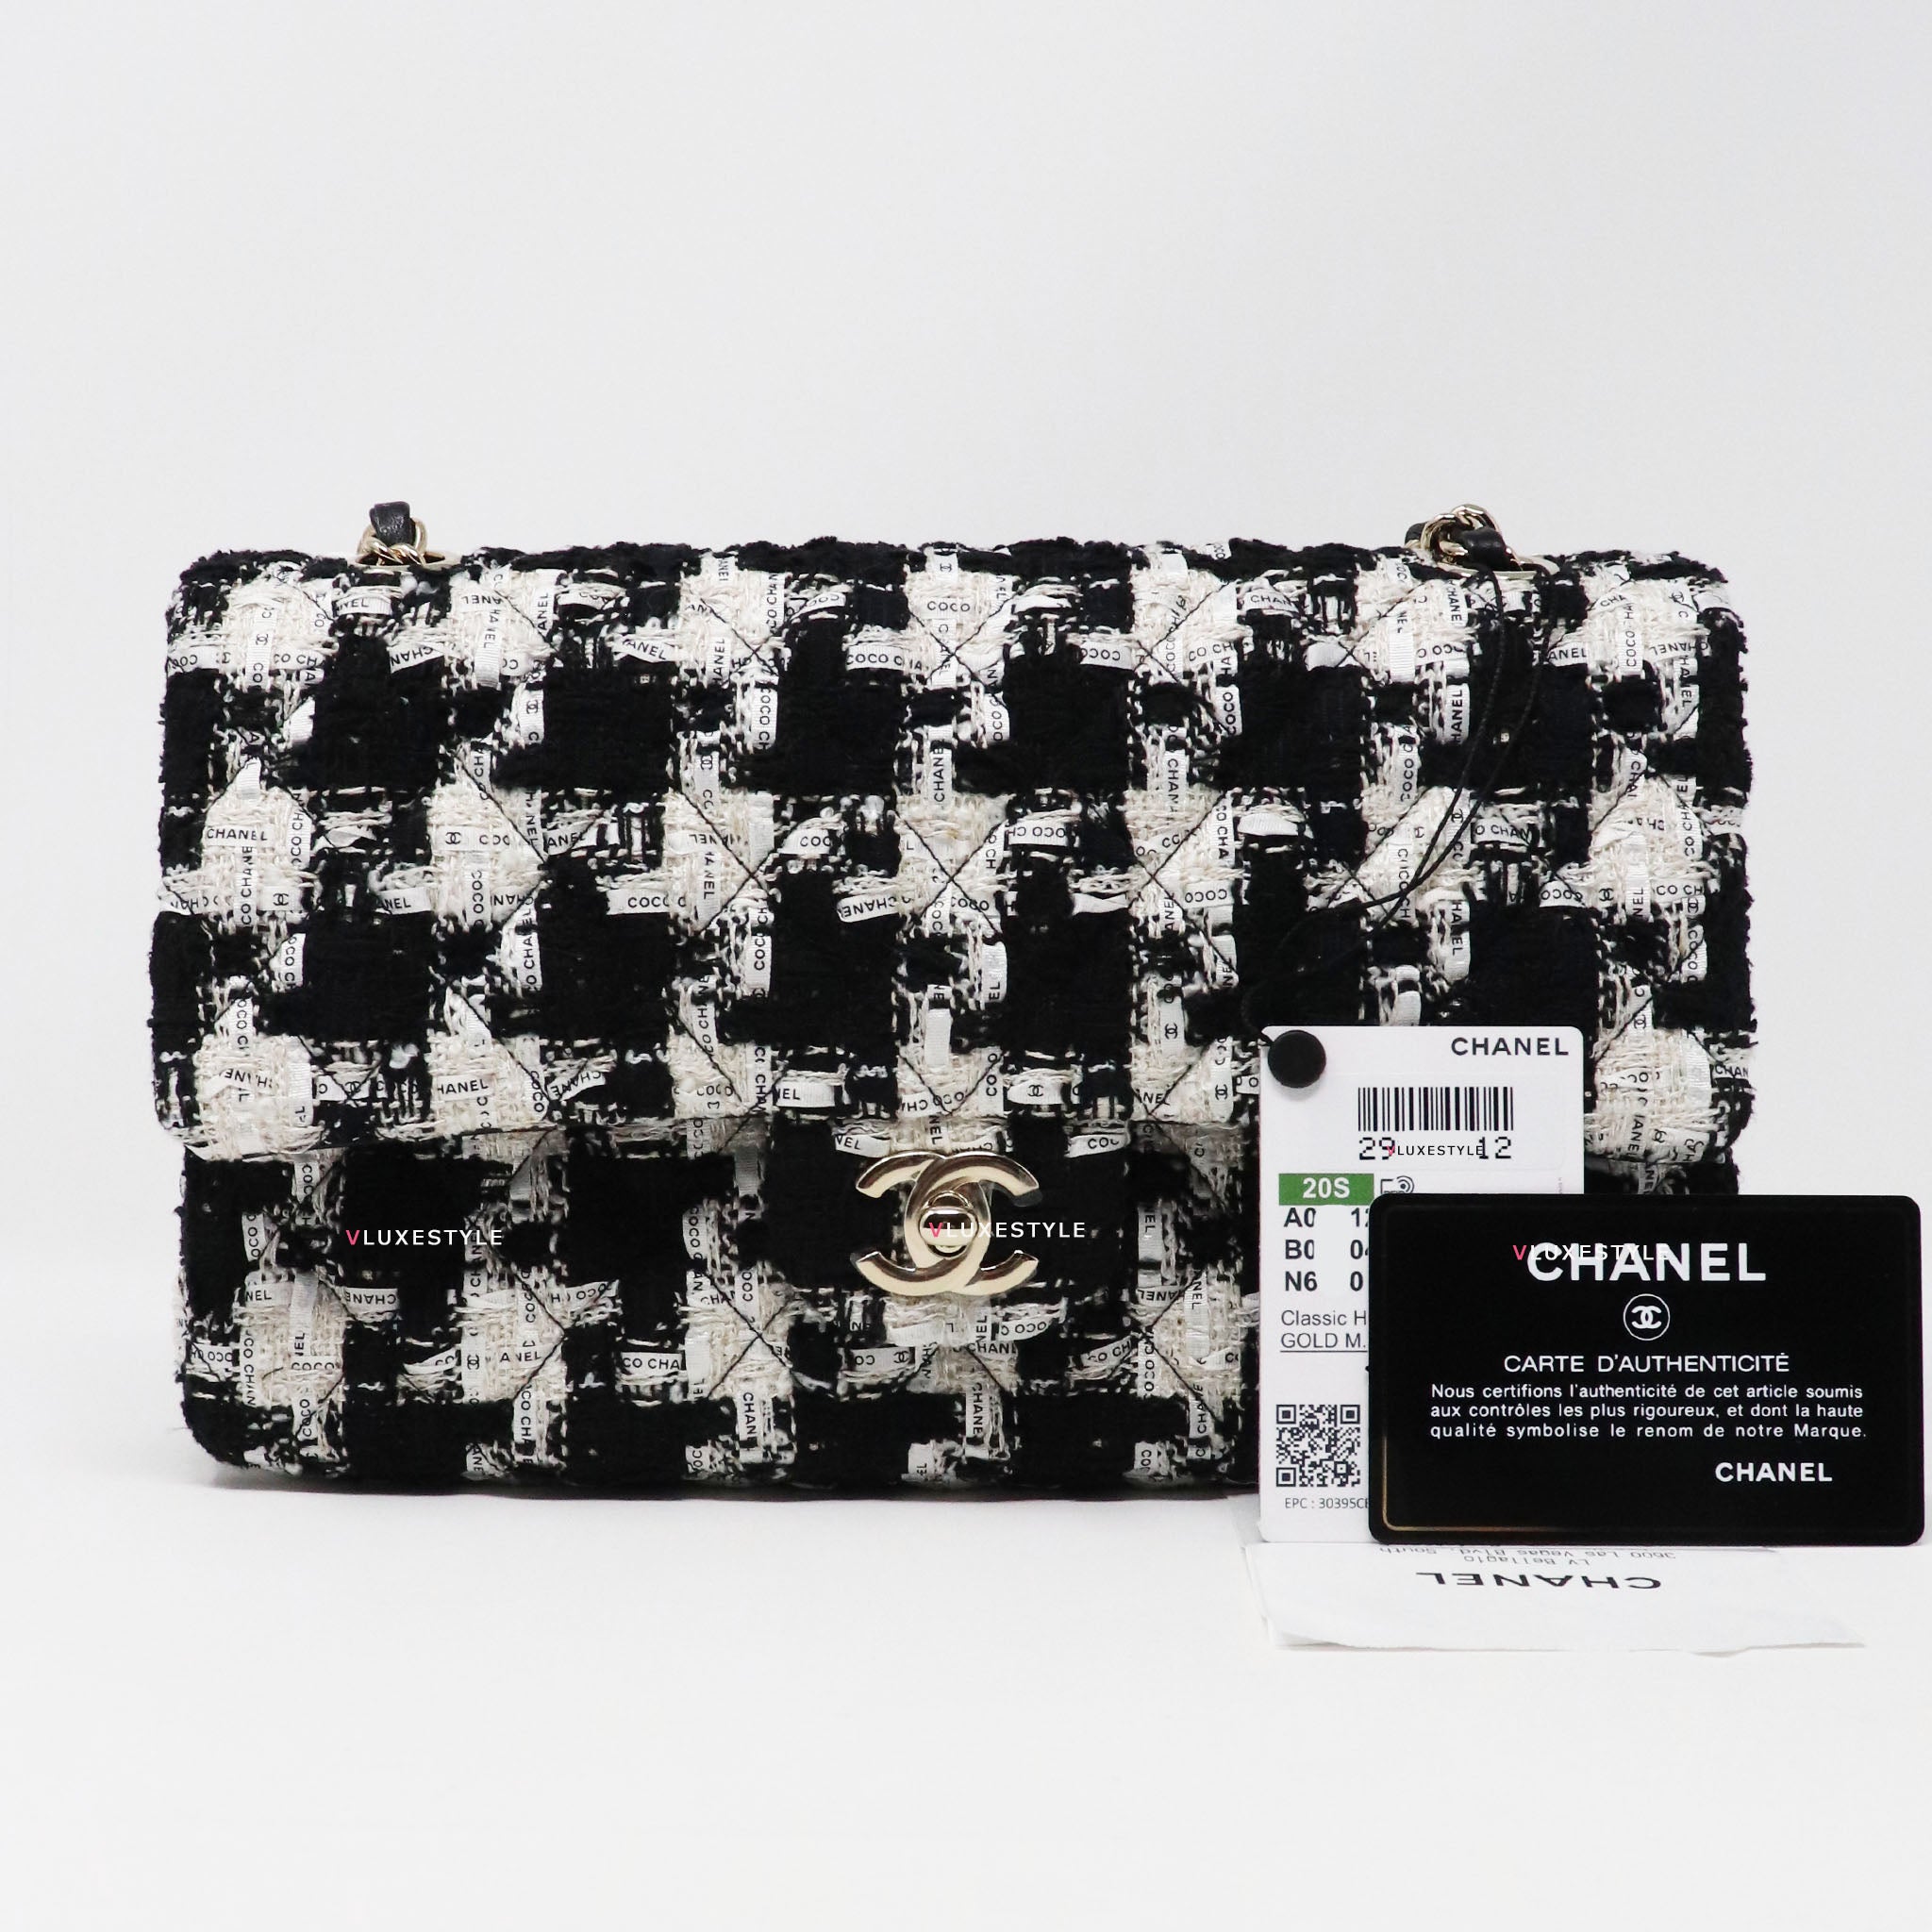 Chanel Multicolor Flap - 60 For Sale on 1stDibs